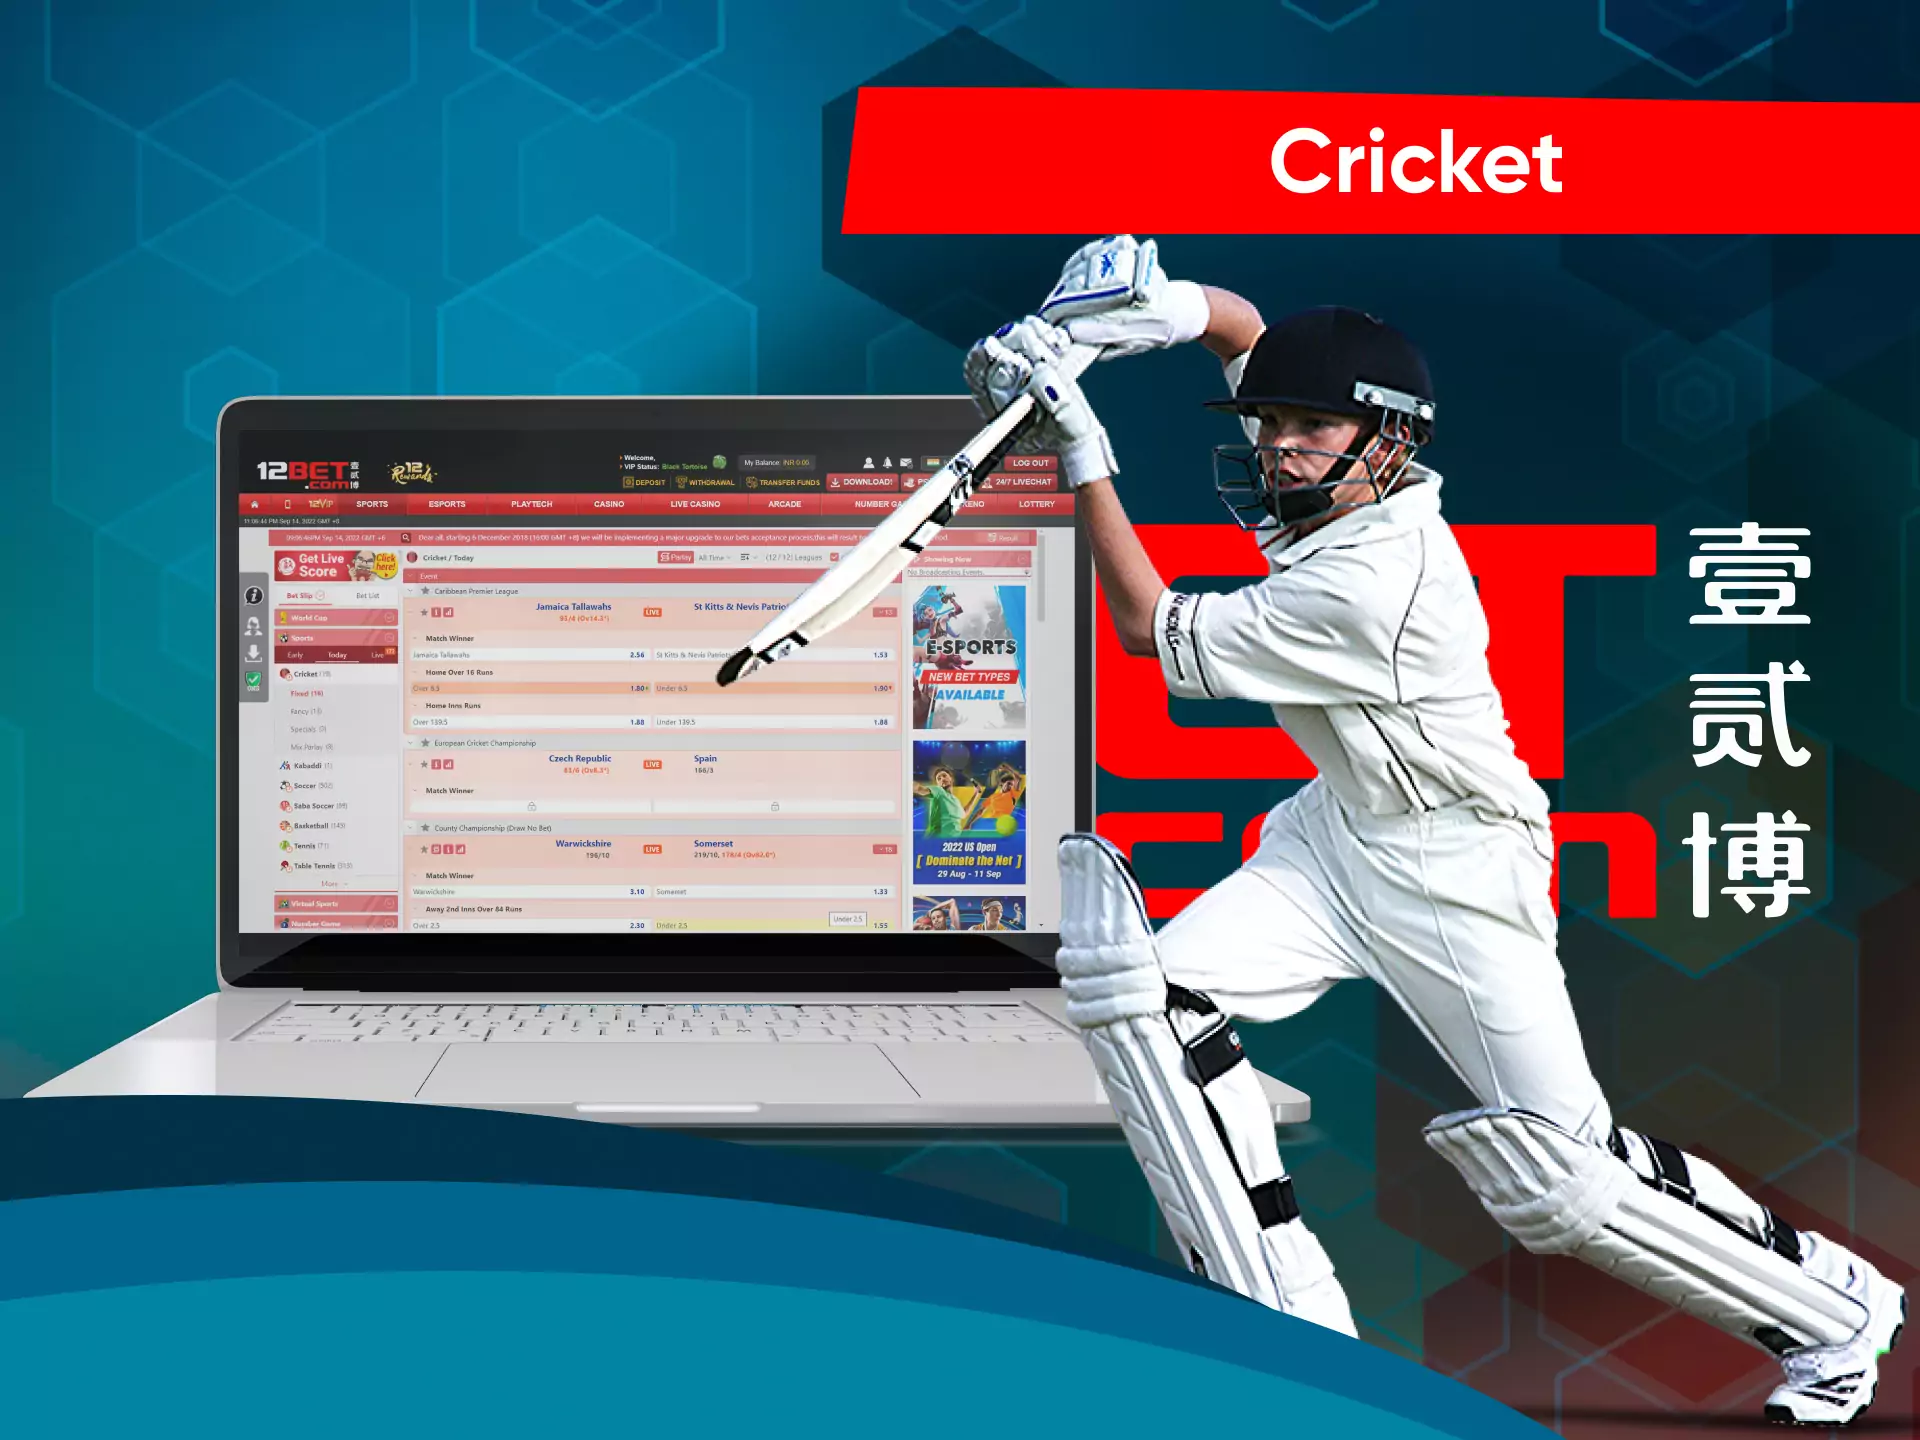 Cricket betting is the most popular activity among Indians on 12bet.